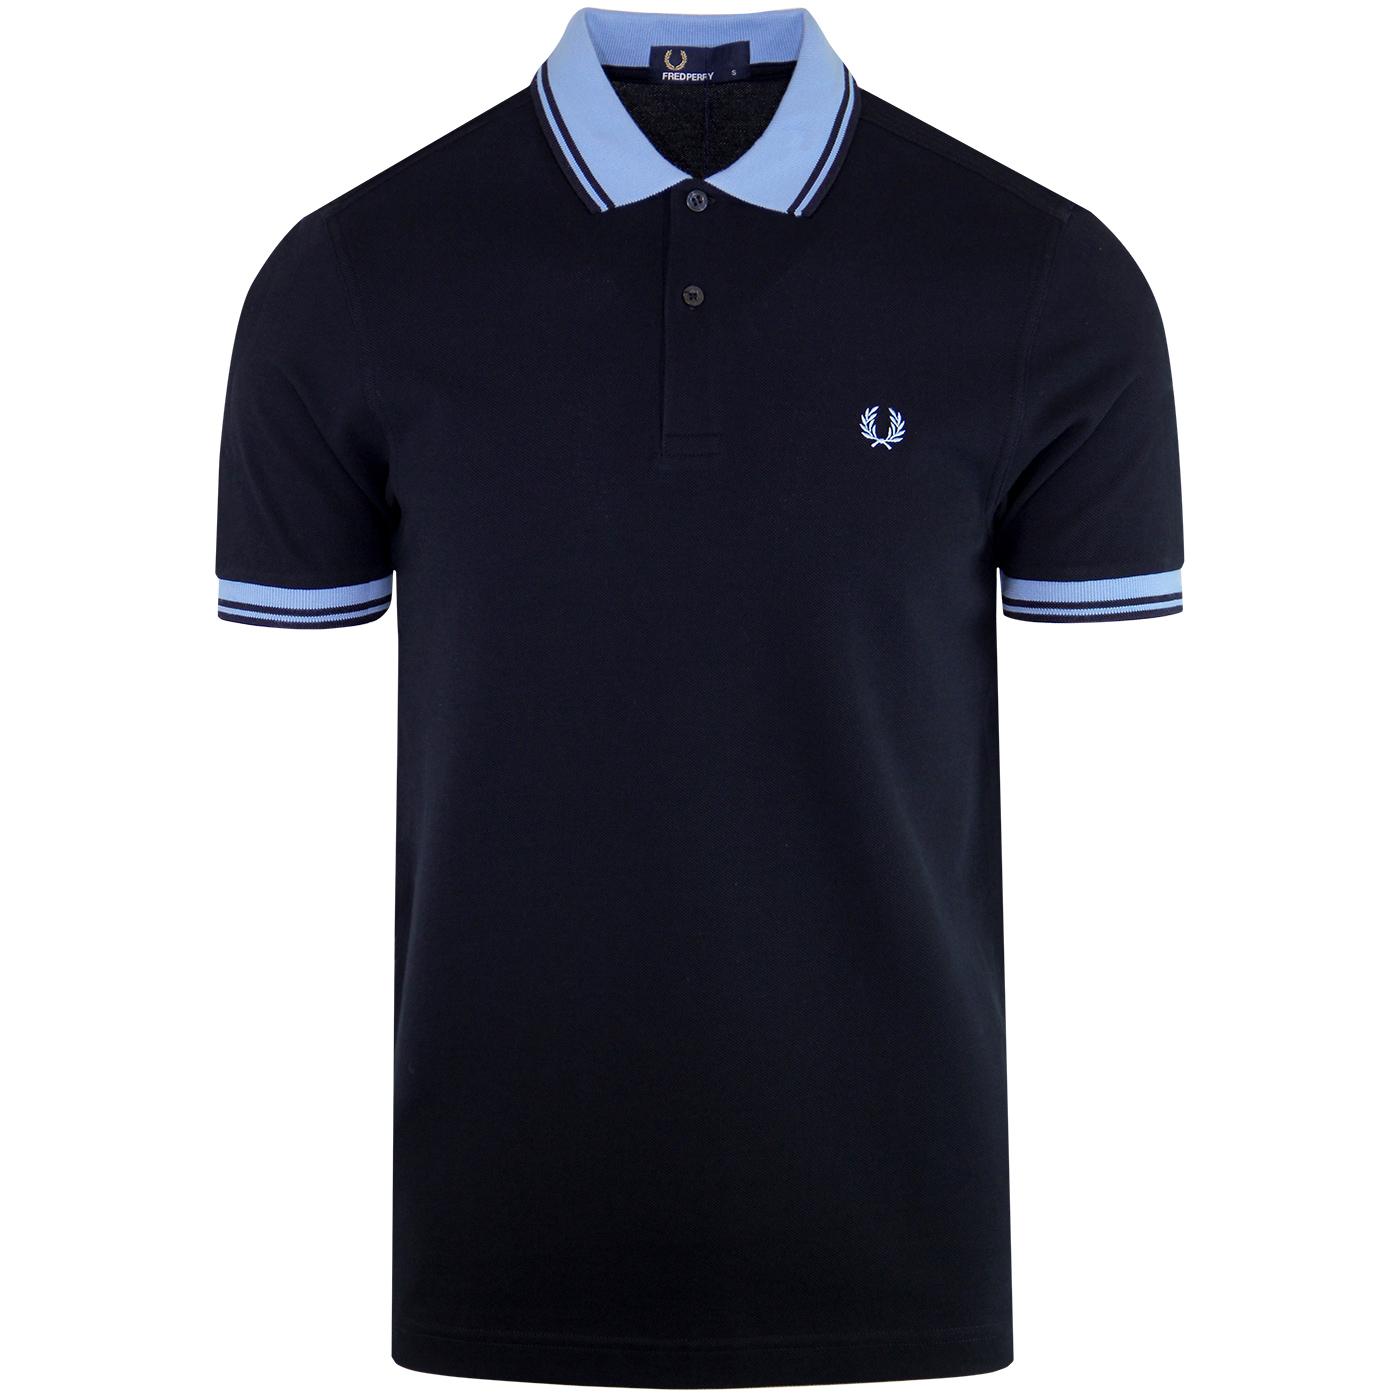 FRED PERRY Contrast Twin Tipped Mod Pique Polo Top Navy